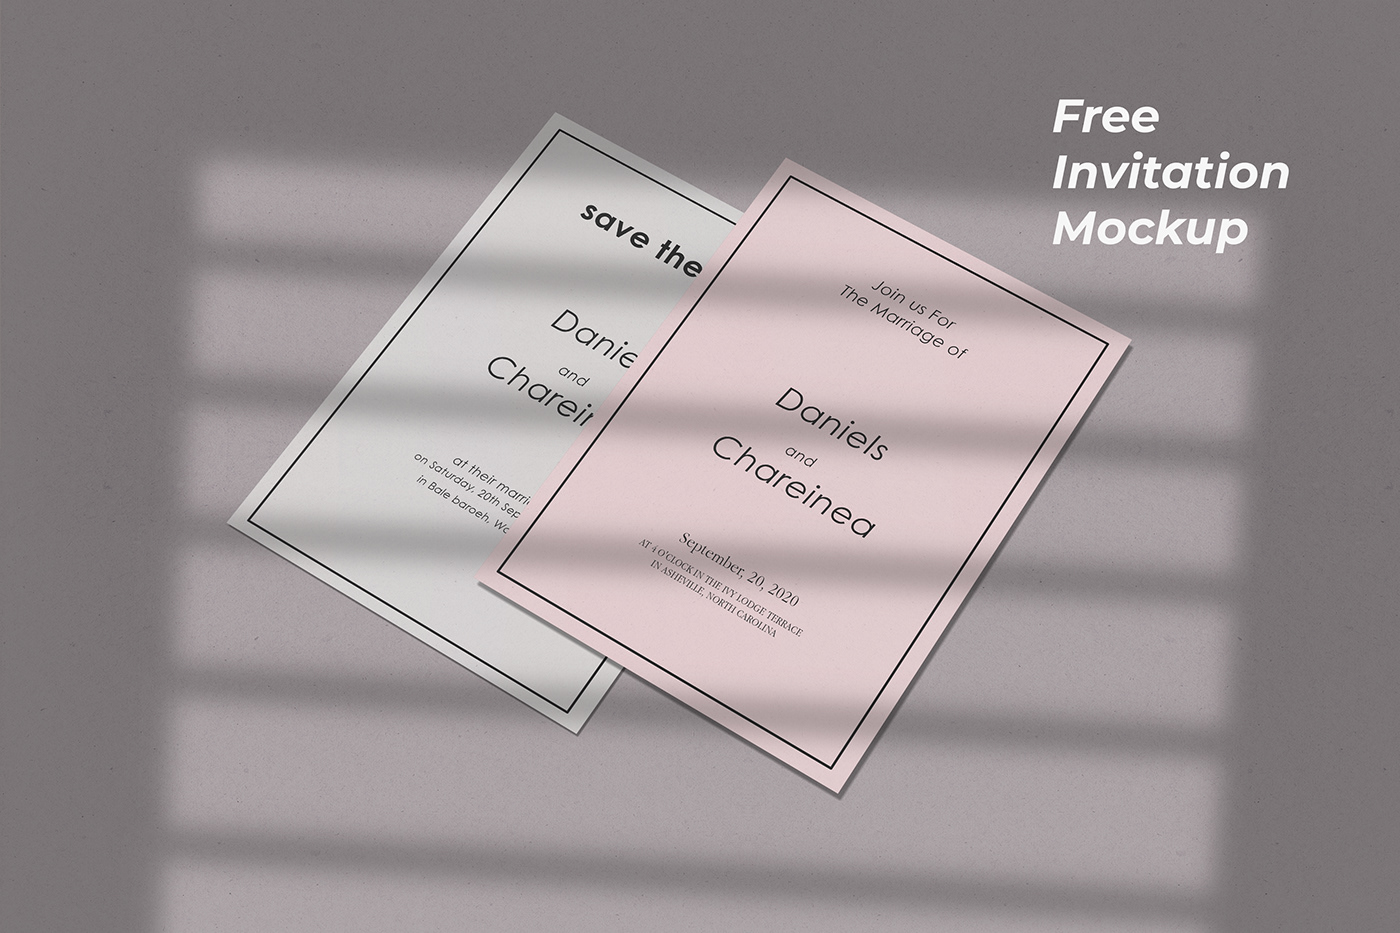 free Invitation Mockup party psd save the date suit wedding